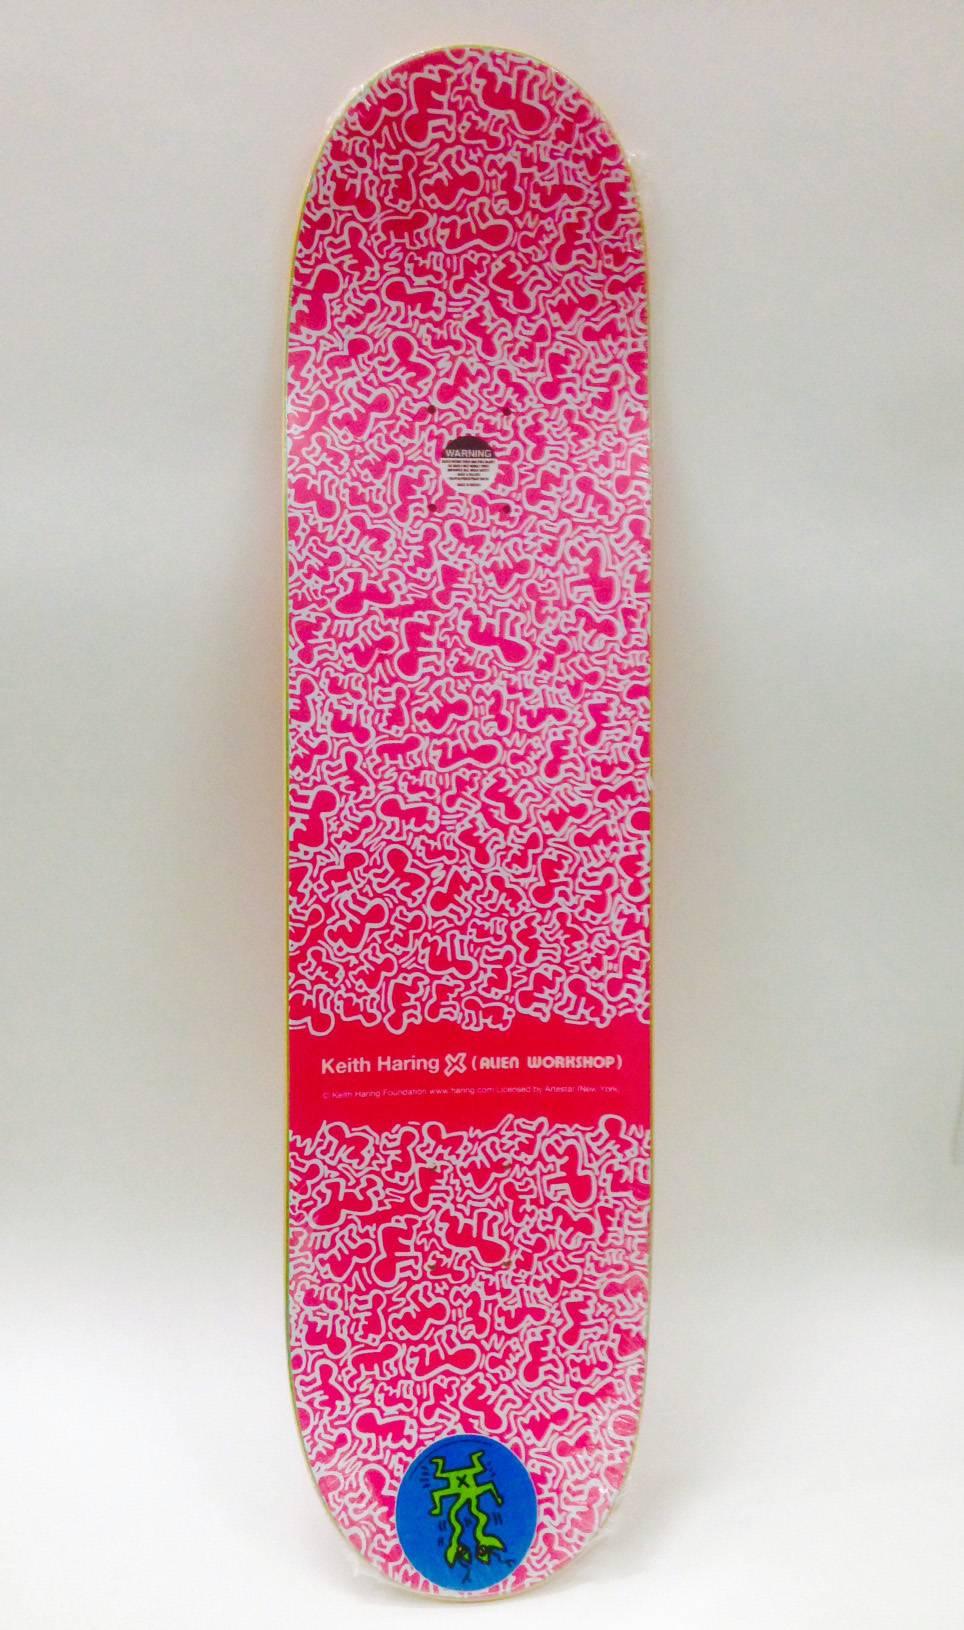 Keith Haring Skateboard Deck (New) - Print by (after) Keith Haring